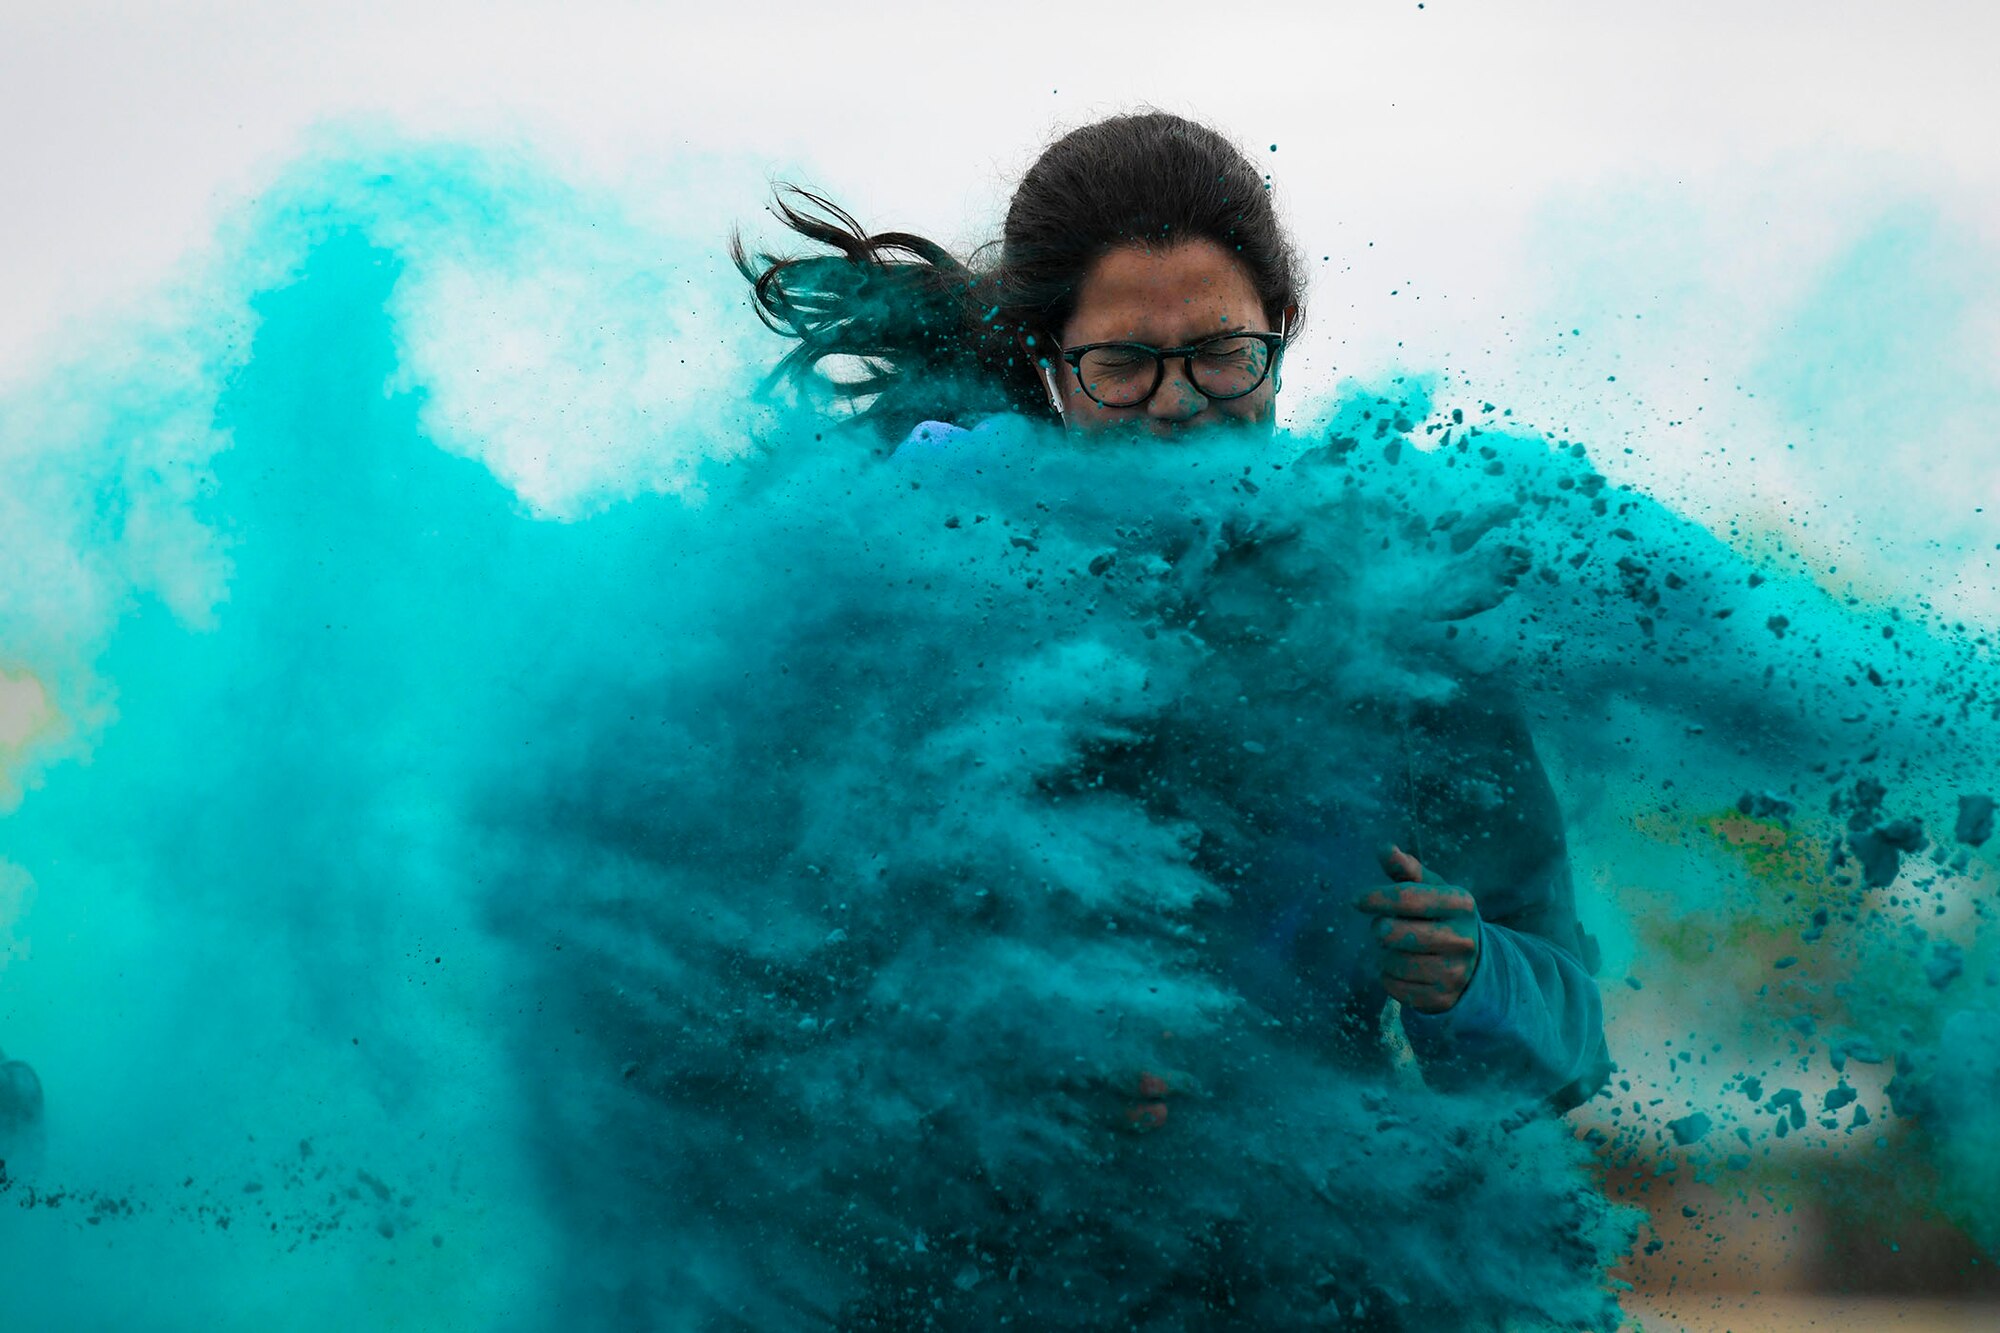 A 341st Missile Wing community member participates in a suicide awareness color run Sept. 30, 2020, at Malmstrom Air Force Base, Mont.